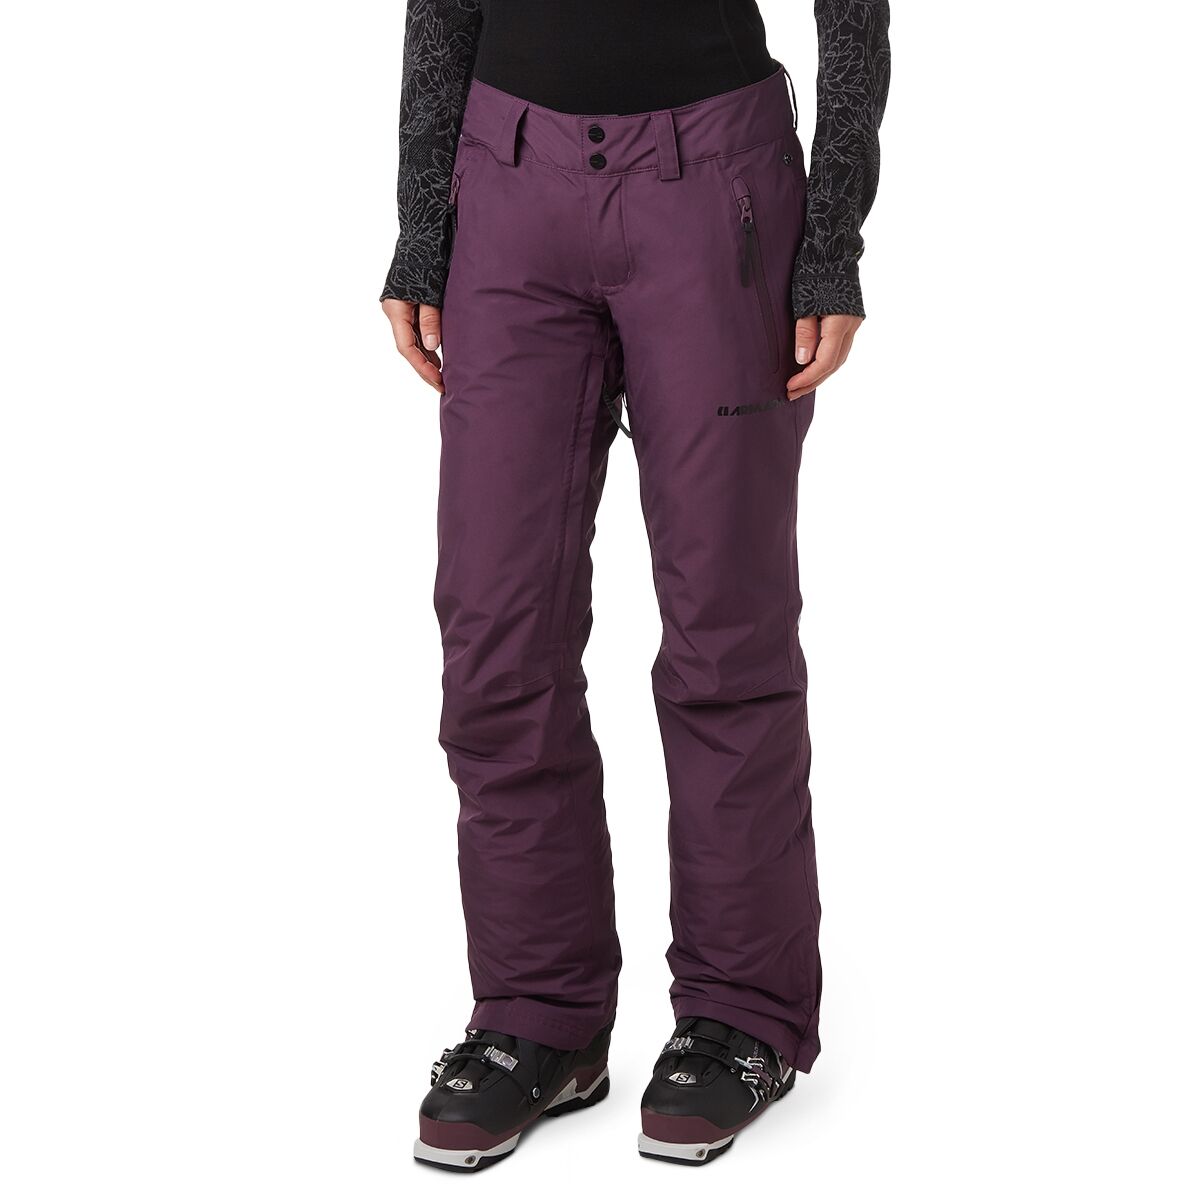 Trego GORE-TEX 2L Insulated Pant - Women